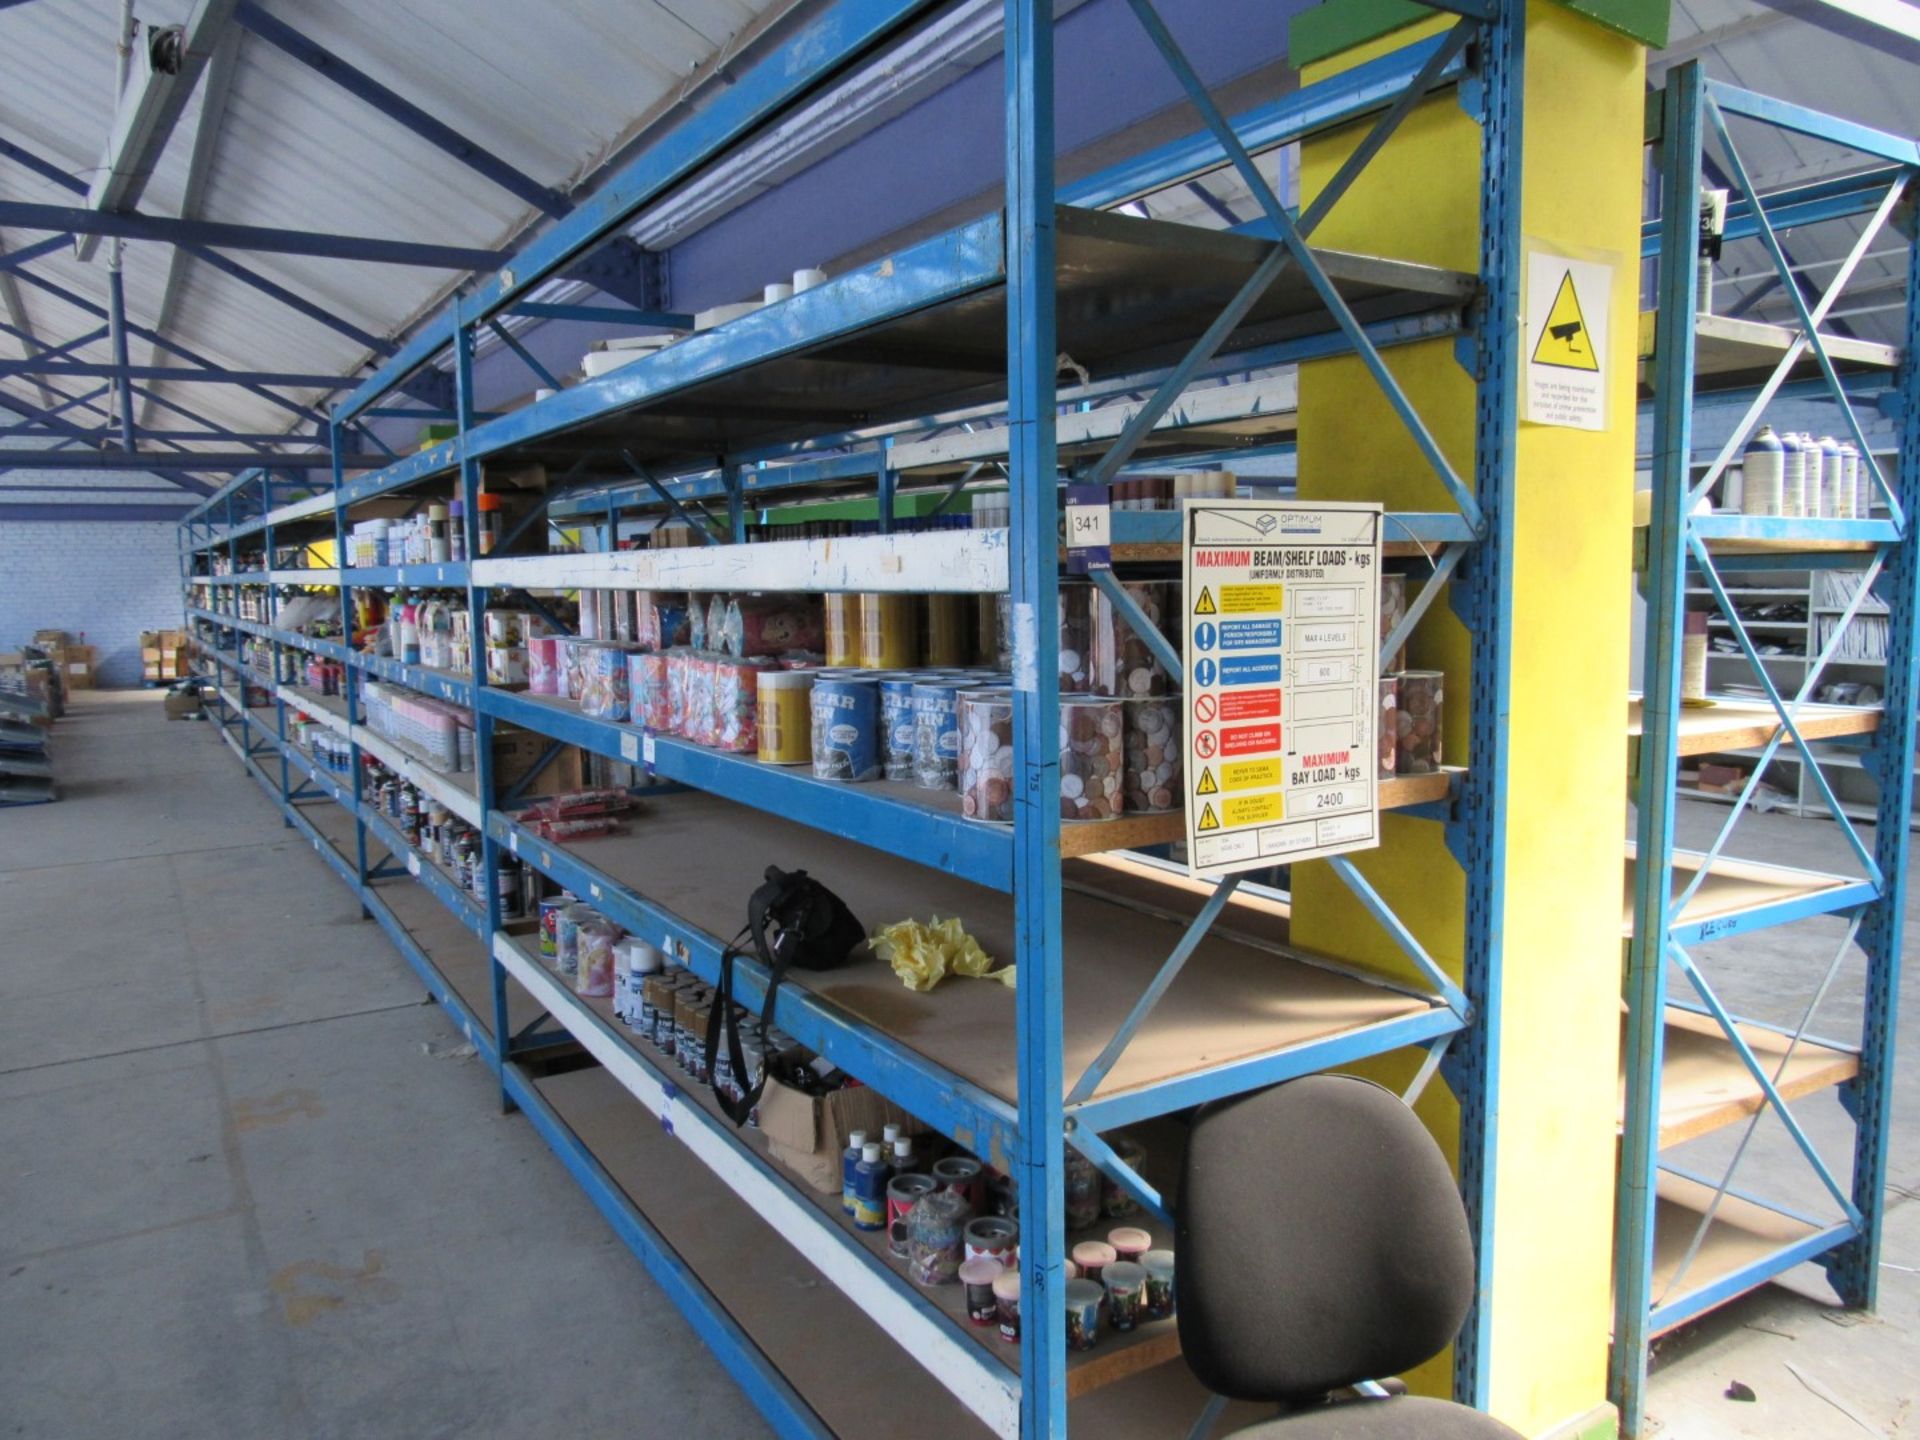 7 bays multi tier boltless shelving 2400 high x 840 wide (Delayed collection until last afternoon of